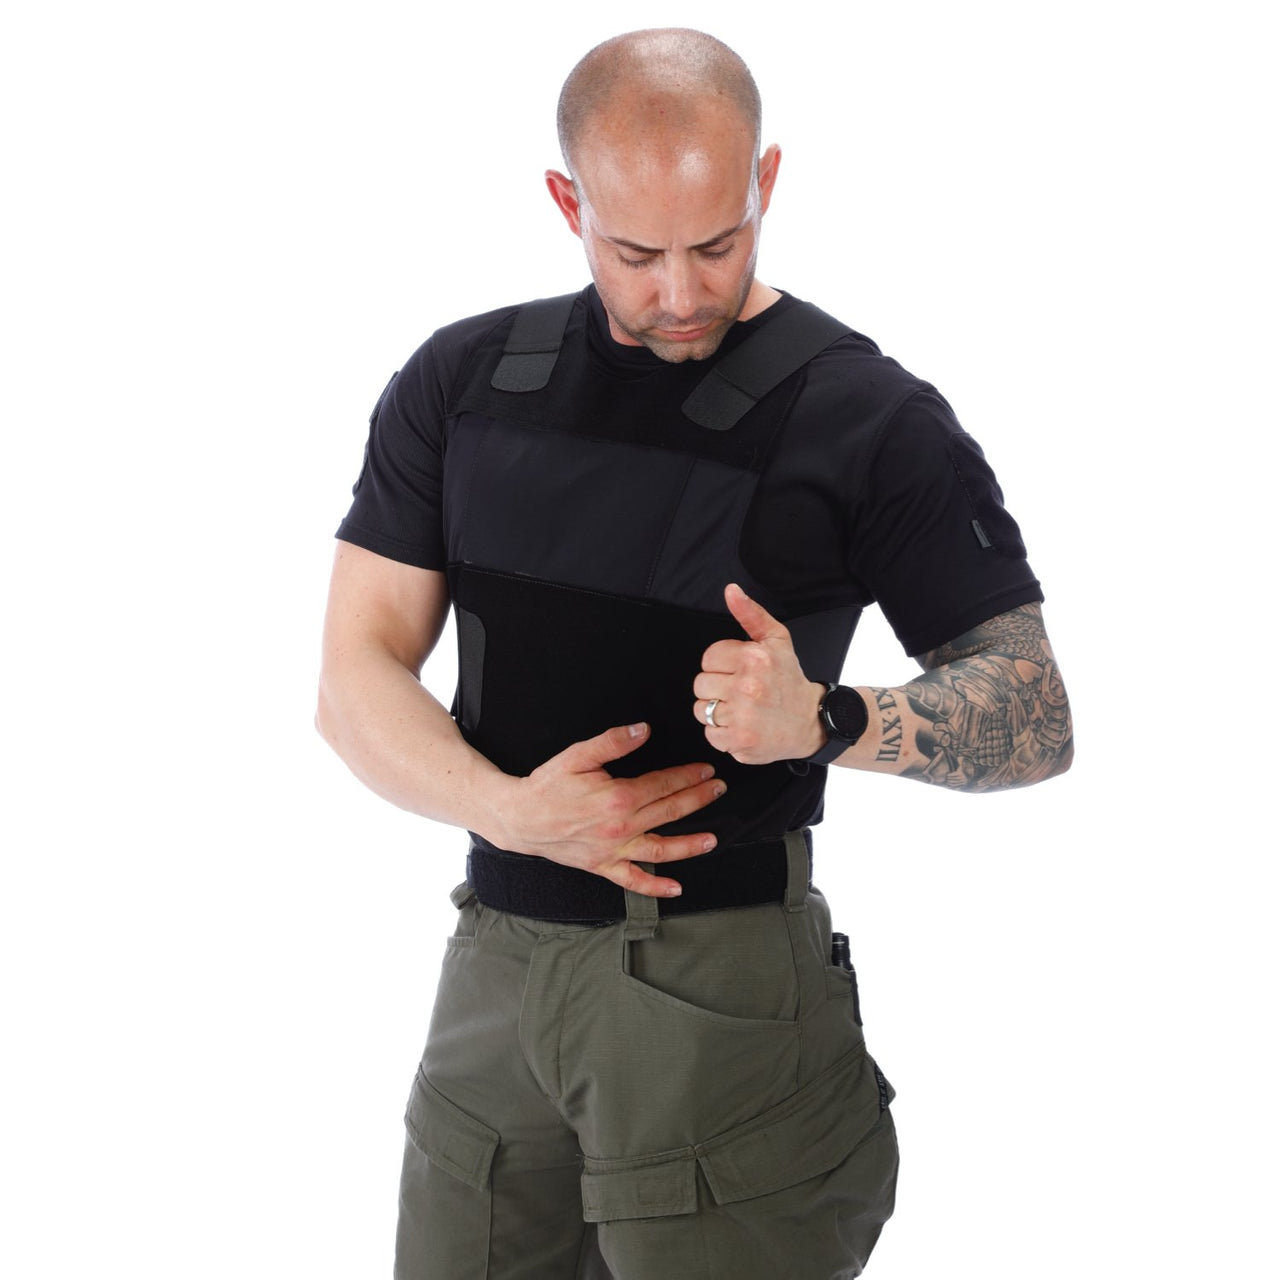 A man wearing a black shirt and green pants, carrying the Body Armor Direct All American Concealable Enhanced Multi-Threat Vest from Body Armor Direct.